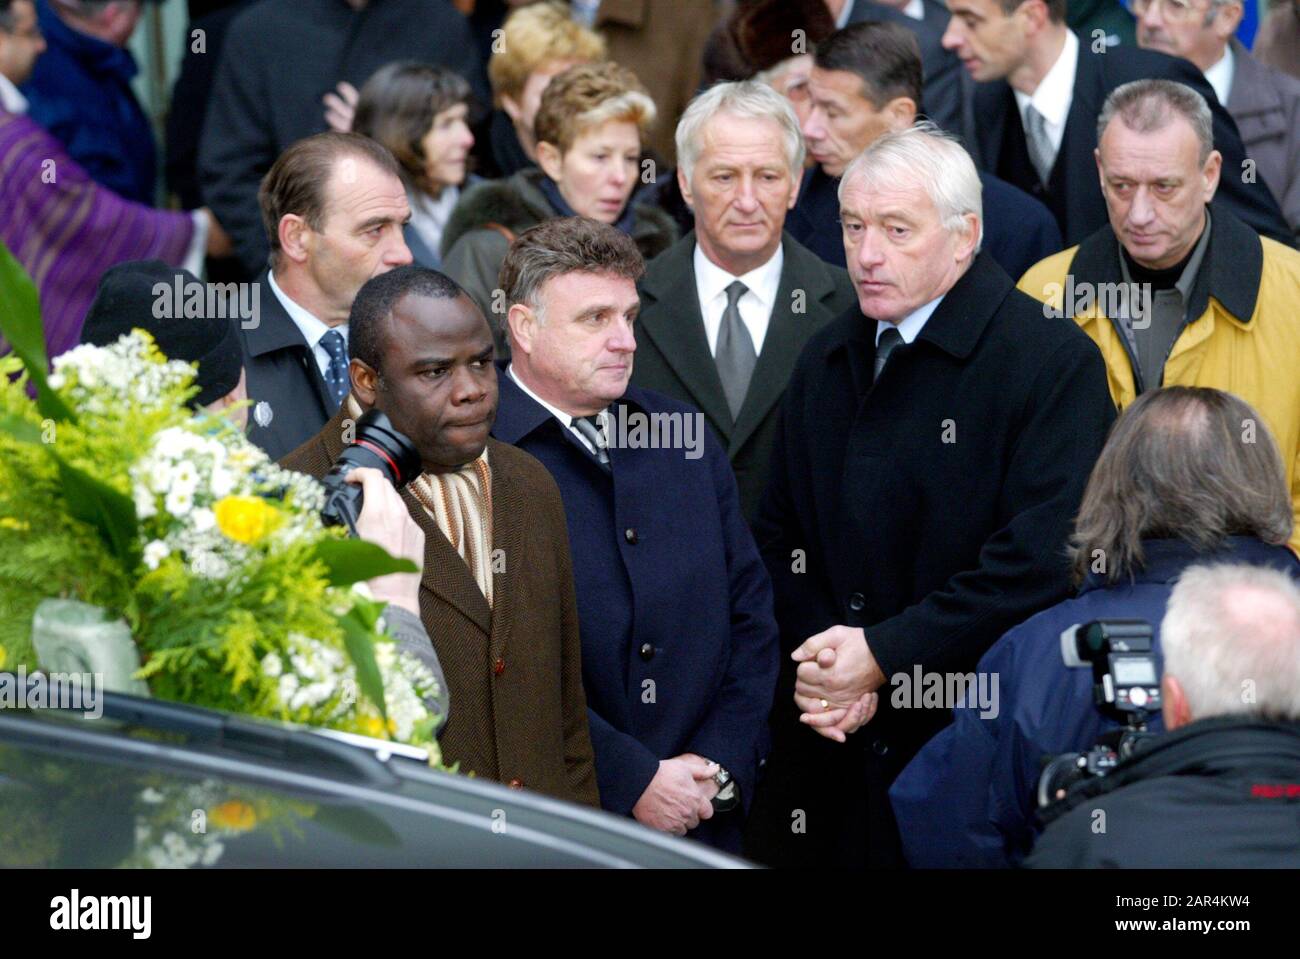 Raymond Goethals Funerailles Funeral Begrafenis Basile Boli Goerges Heylens Christian Piot Robby Rensenbrink Paul Van Himst Odillon Polleunis Picture By Walschaerts Francois Credit: Pro Shots/Alamy Live News Stock Photo